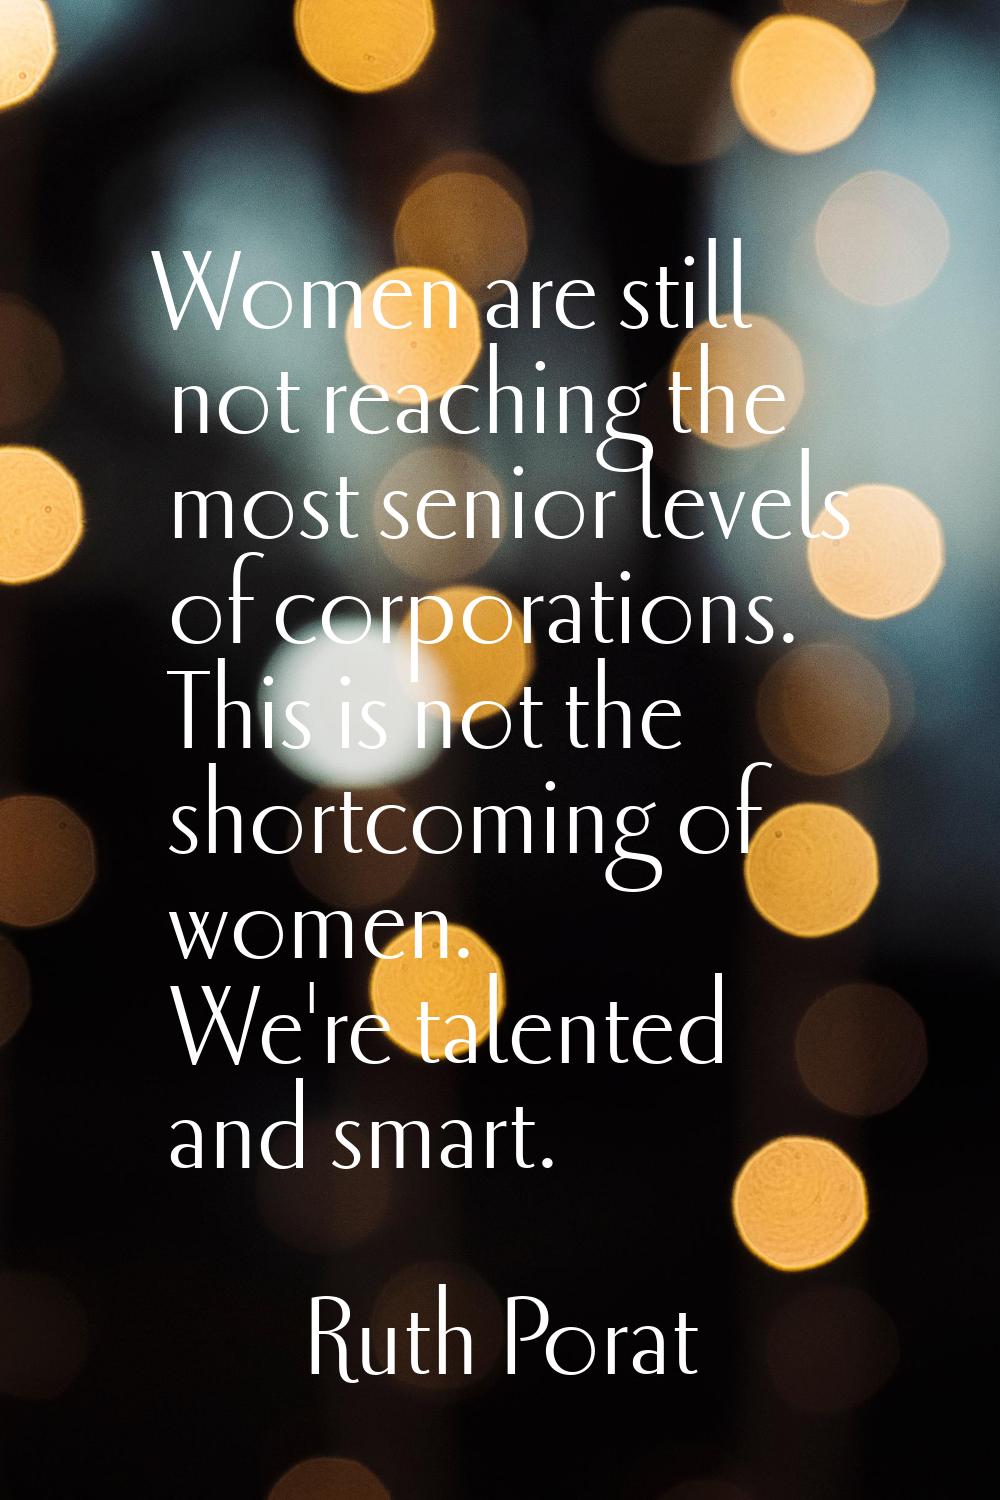 Women are still not reaching the most senior levels of corporations. This is not the shortcoming of